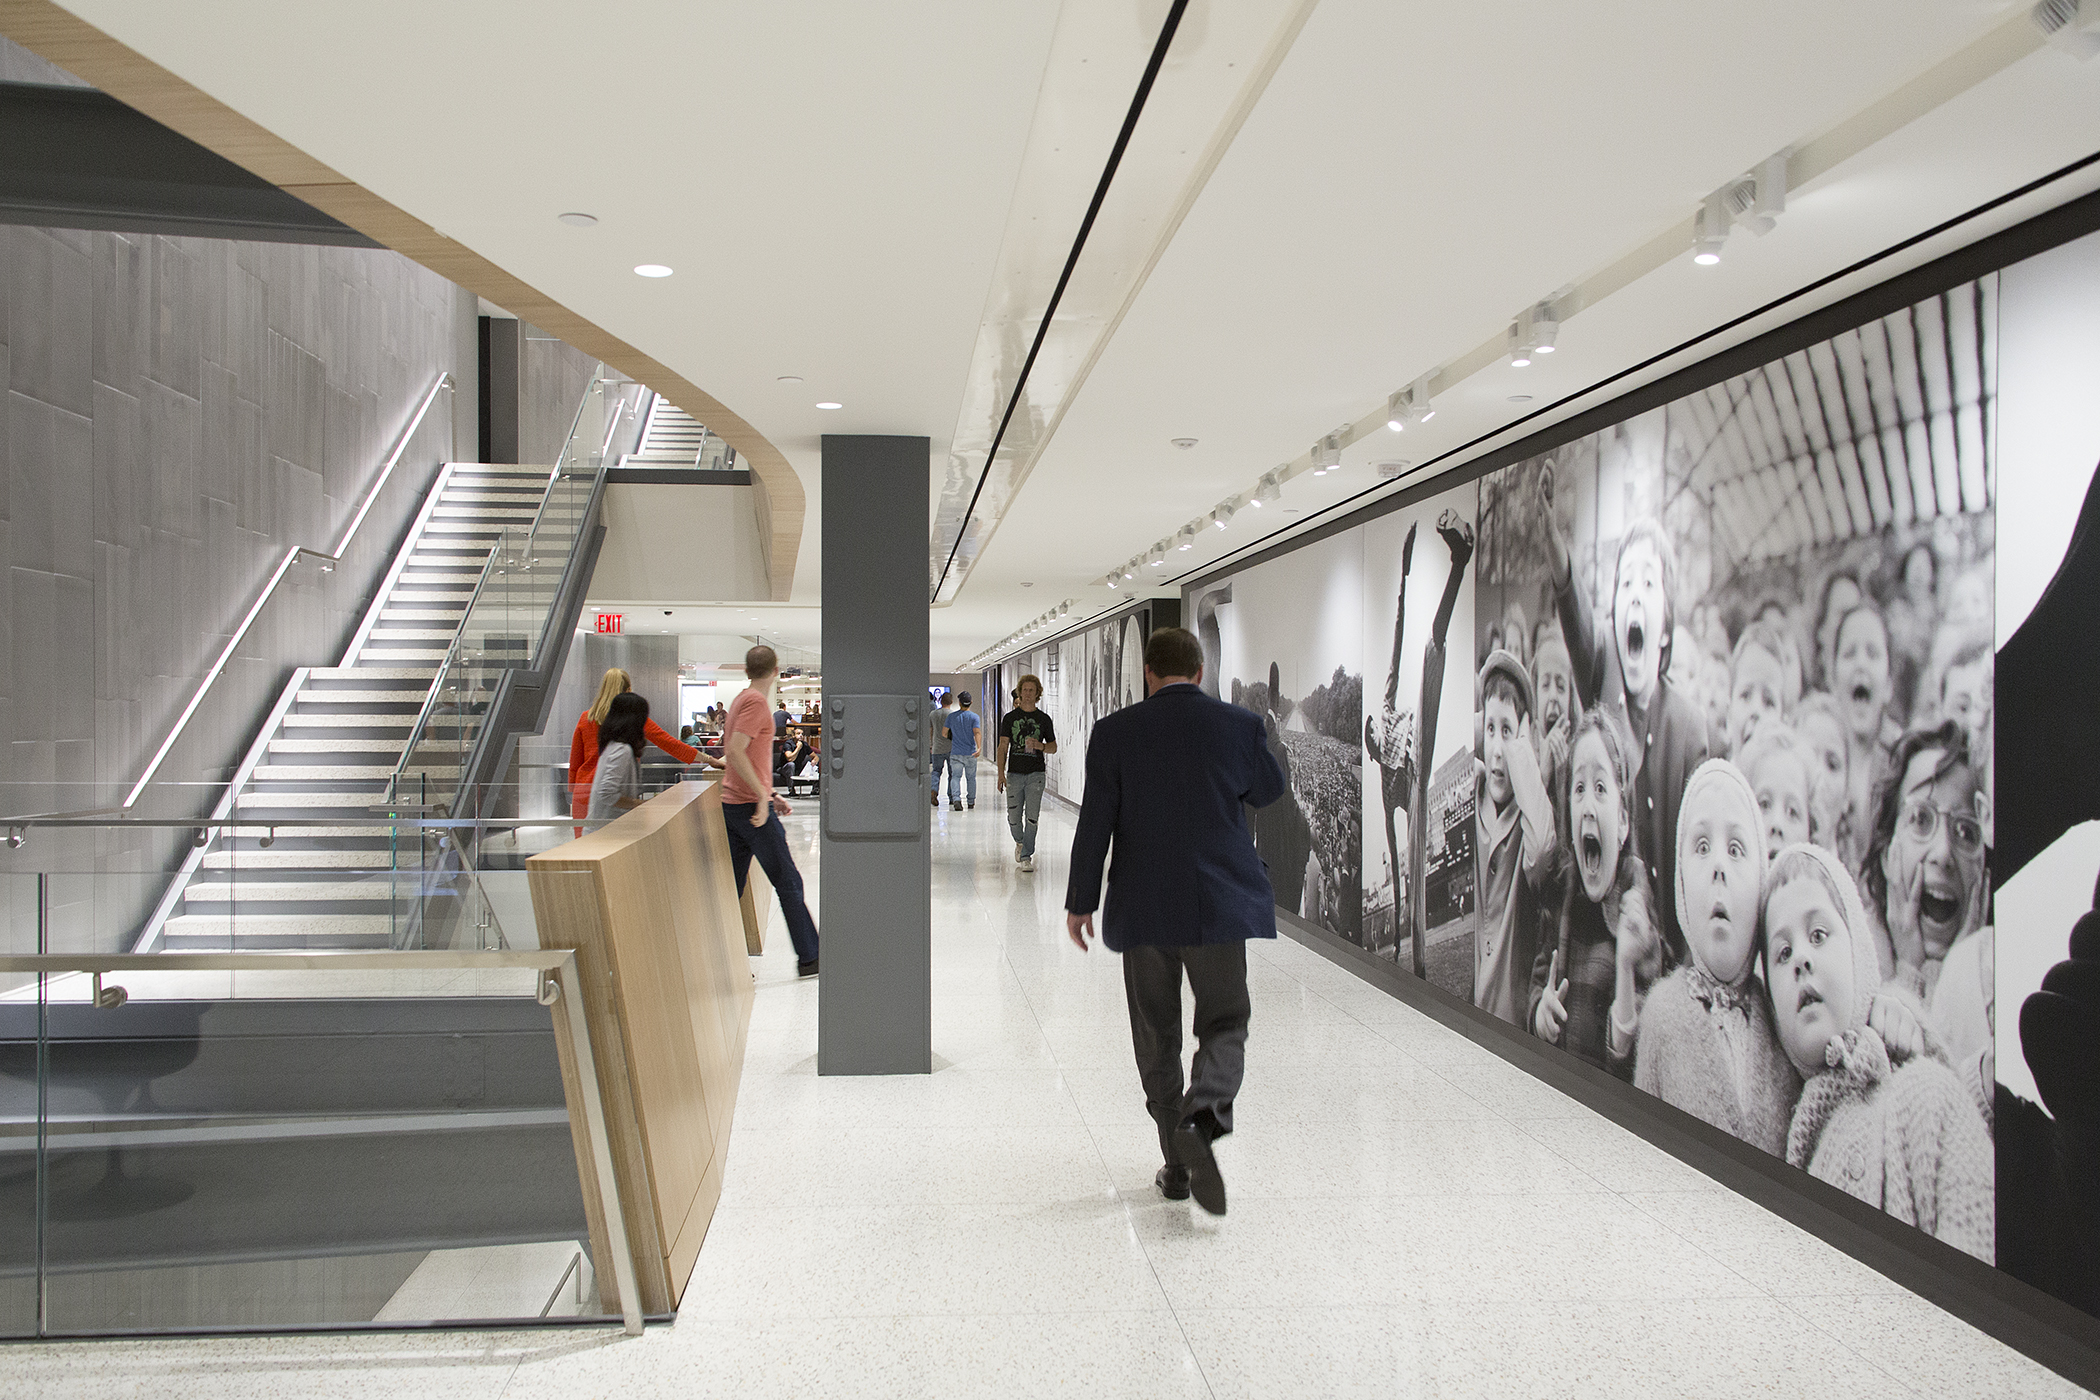 The stunning design of Time Inc.'s offices at 225 Liberty Street won CoreNet NYC's 2016 Project of the Year Award and feature a selection of mural-sized photographs from the Time-Life Picture Collection on the walls of each floor.